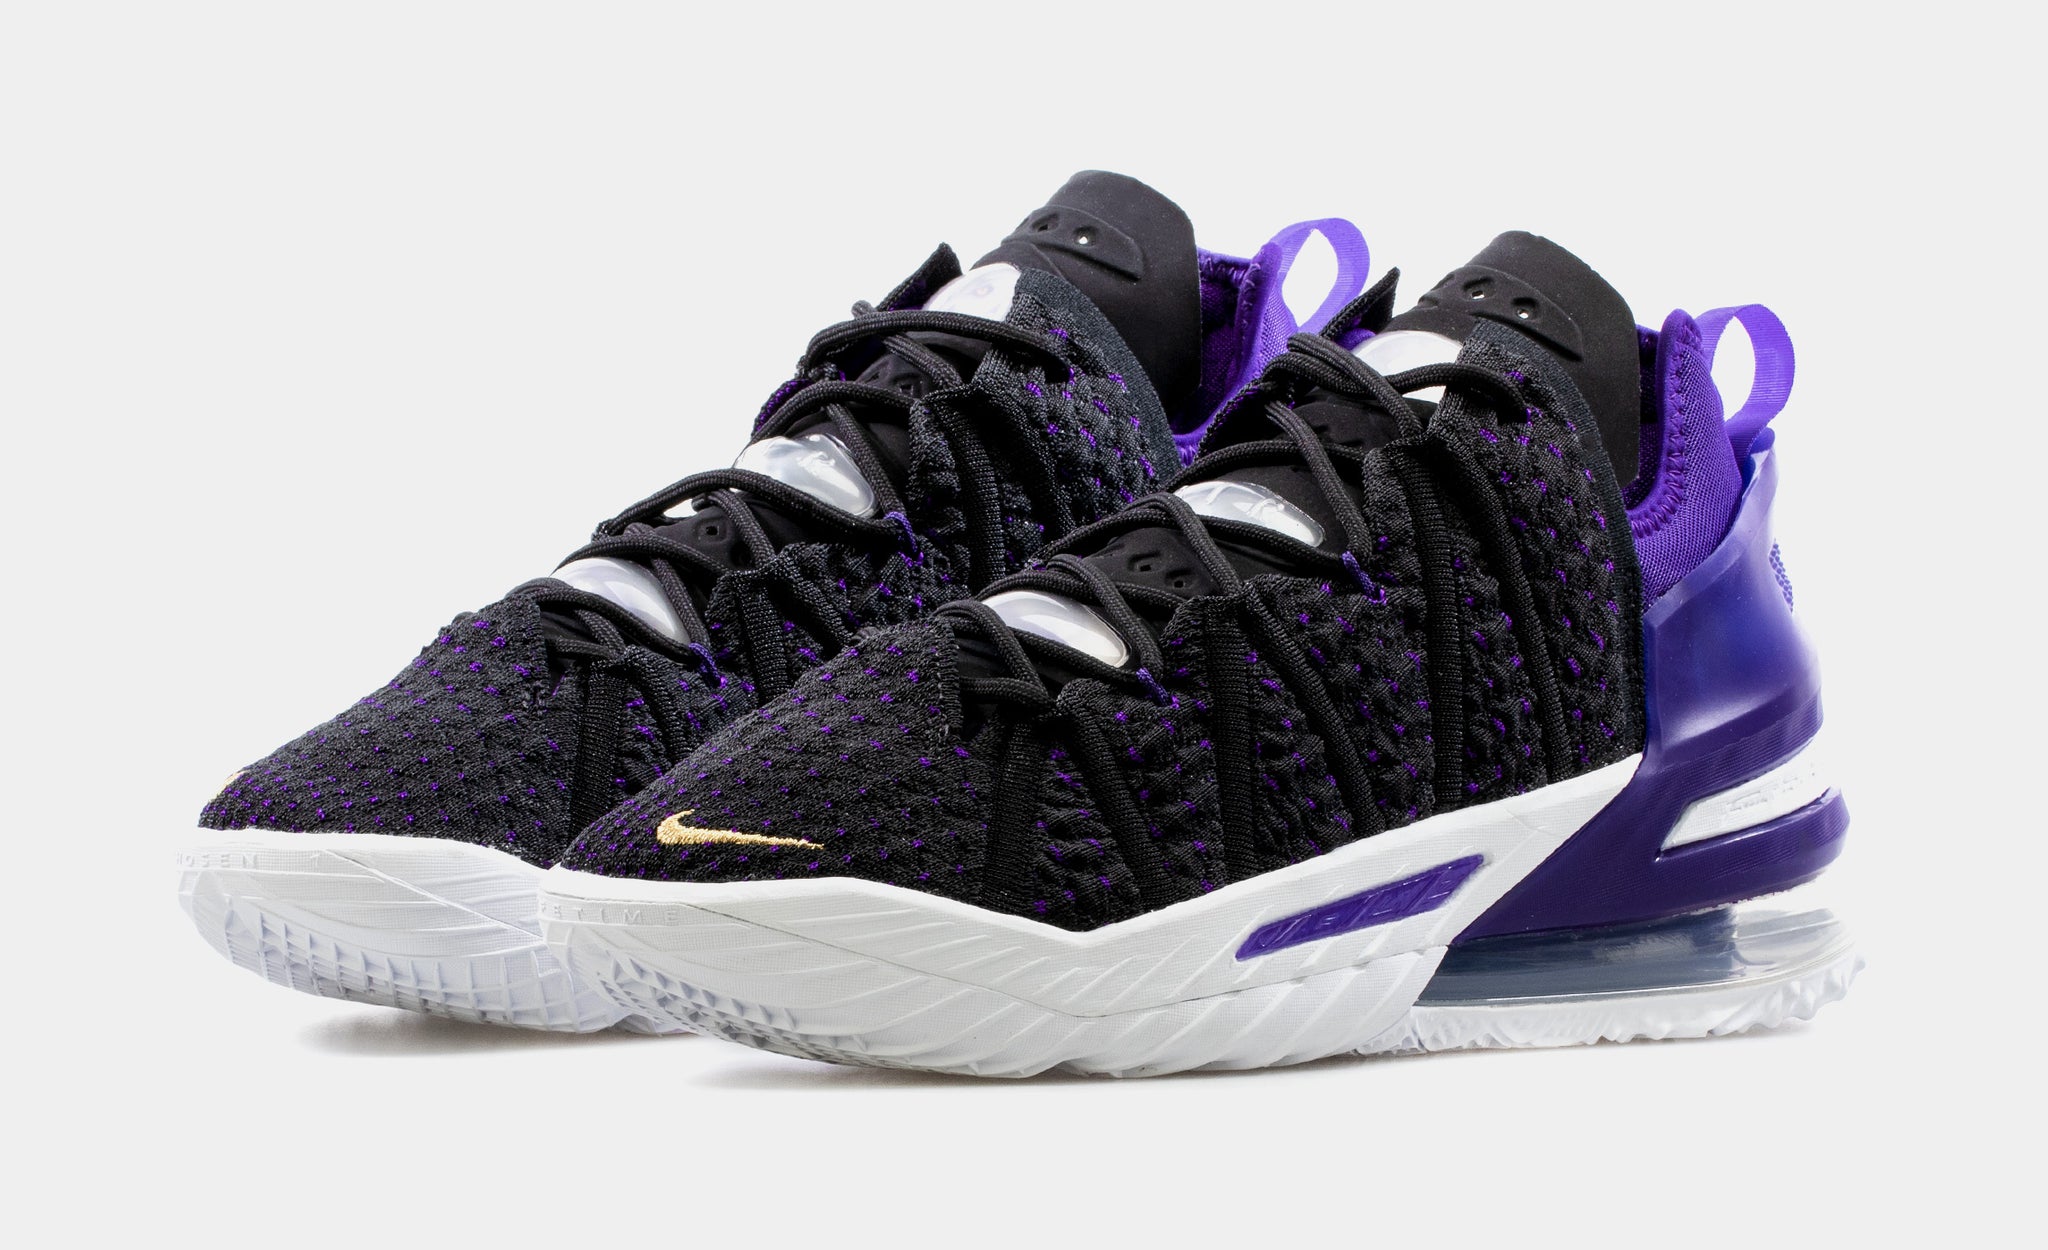 The Nike LeBron 18 Is Releasing in Lakers Colors